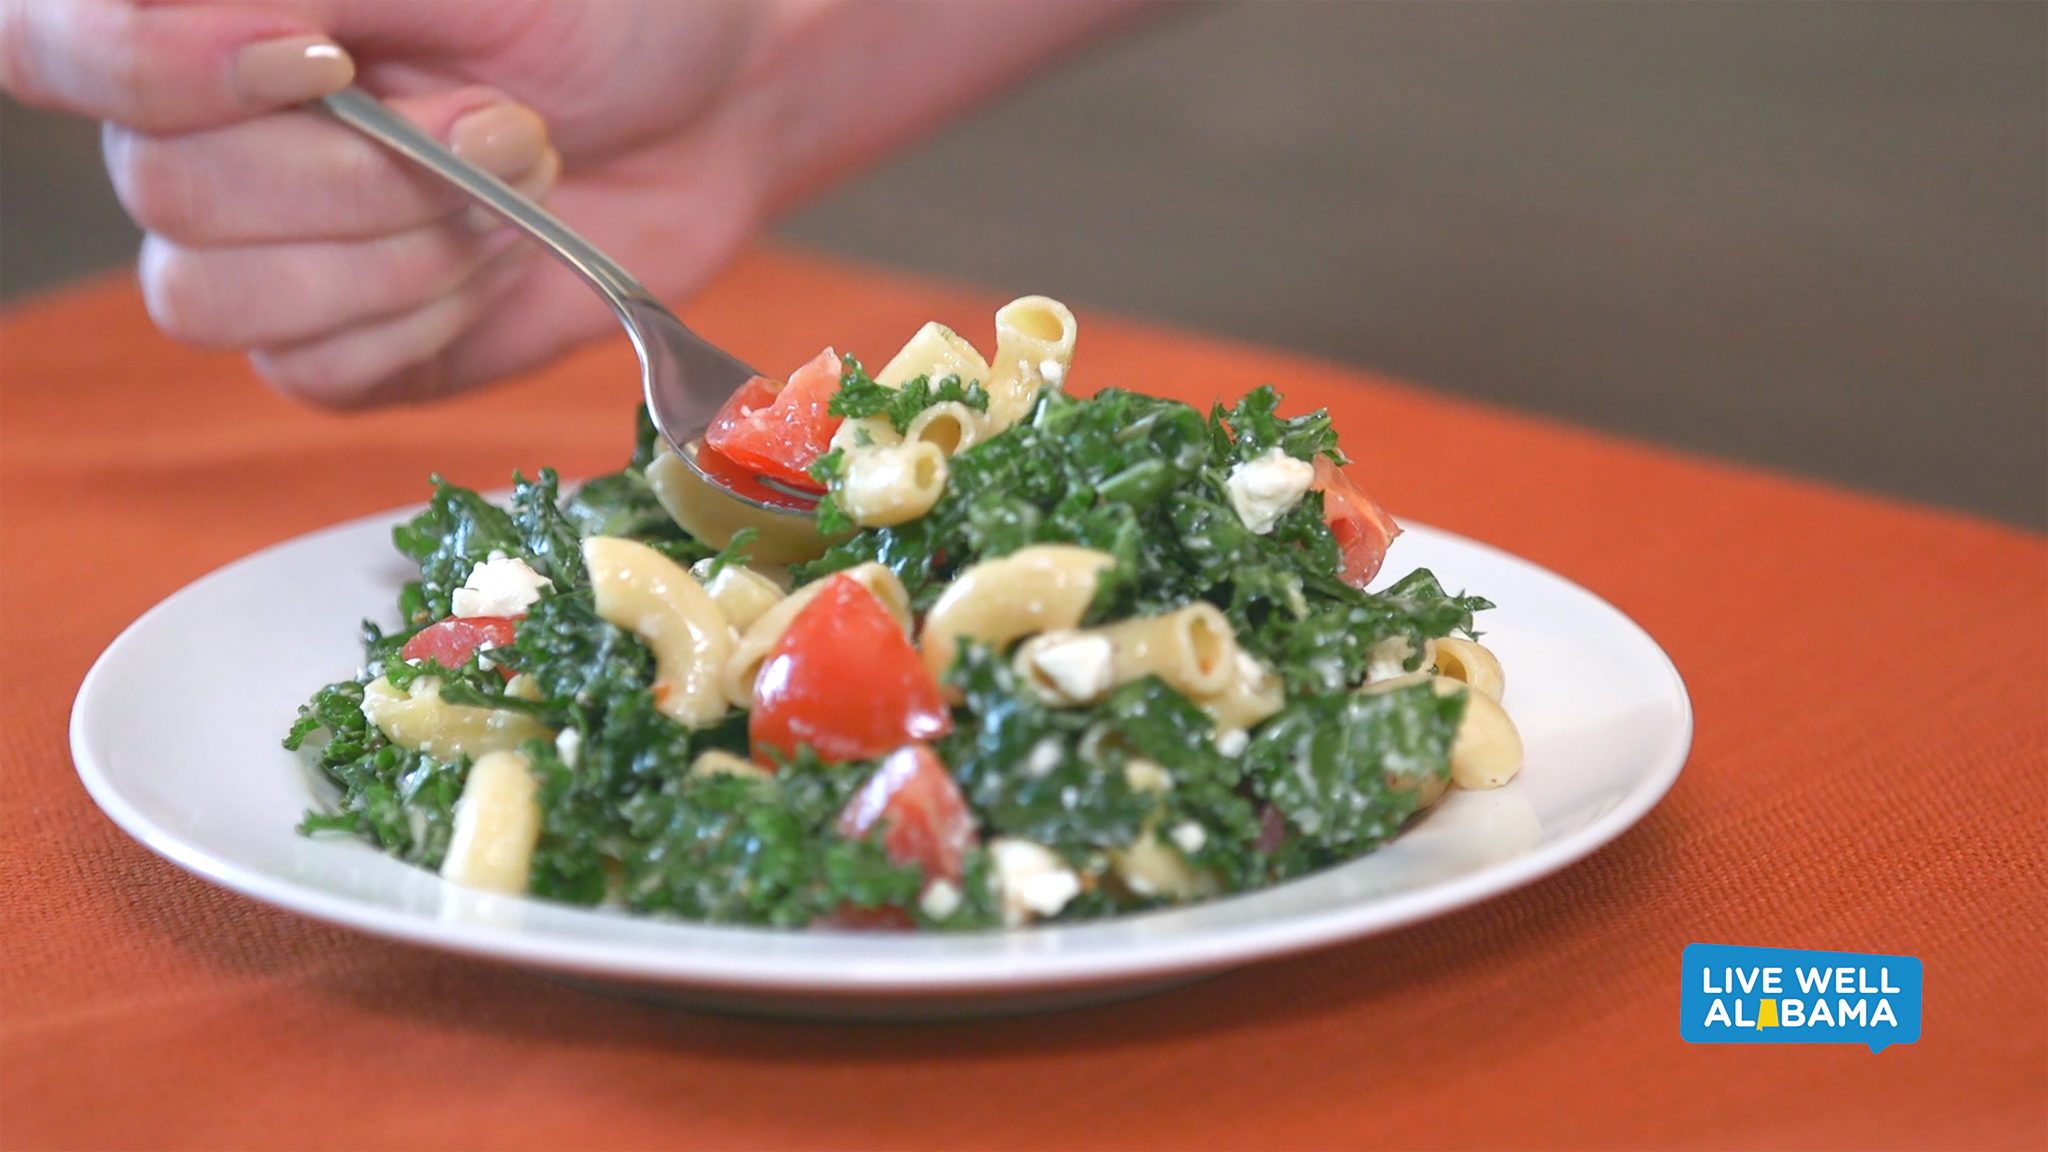 Live Well Alabama recipe, Pasta and Kale Salad. Includes kale, pasta, tomatoes and light dressing.